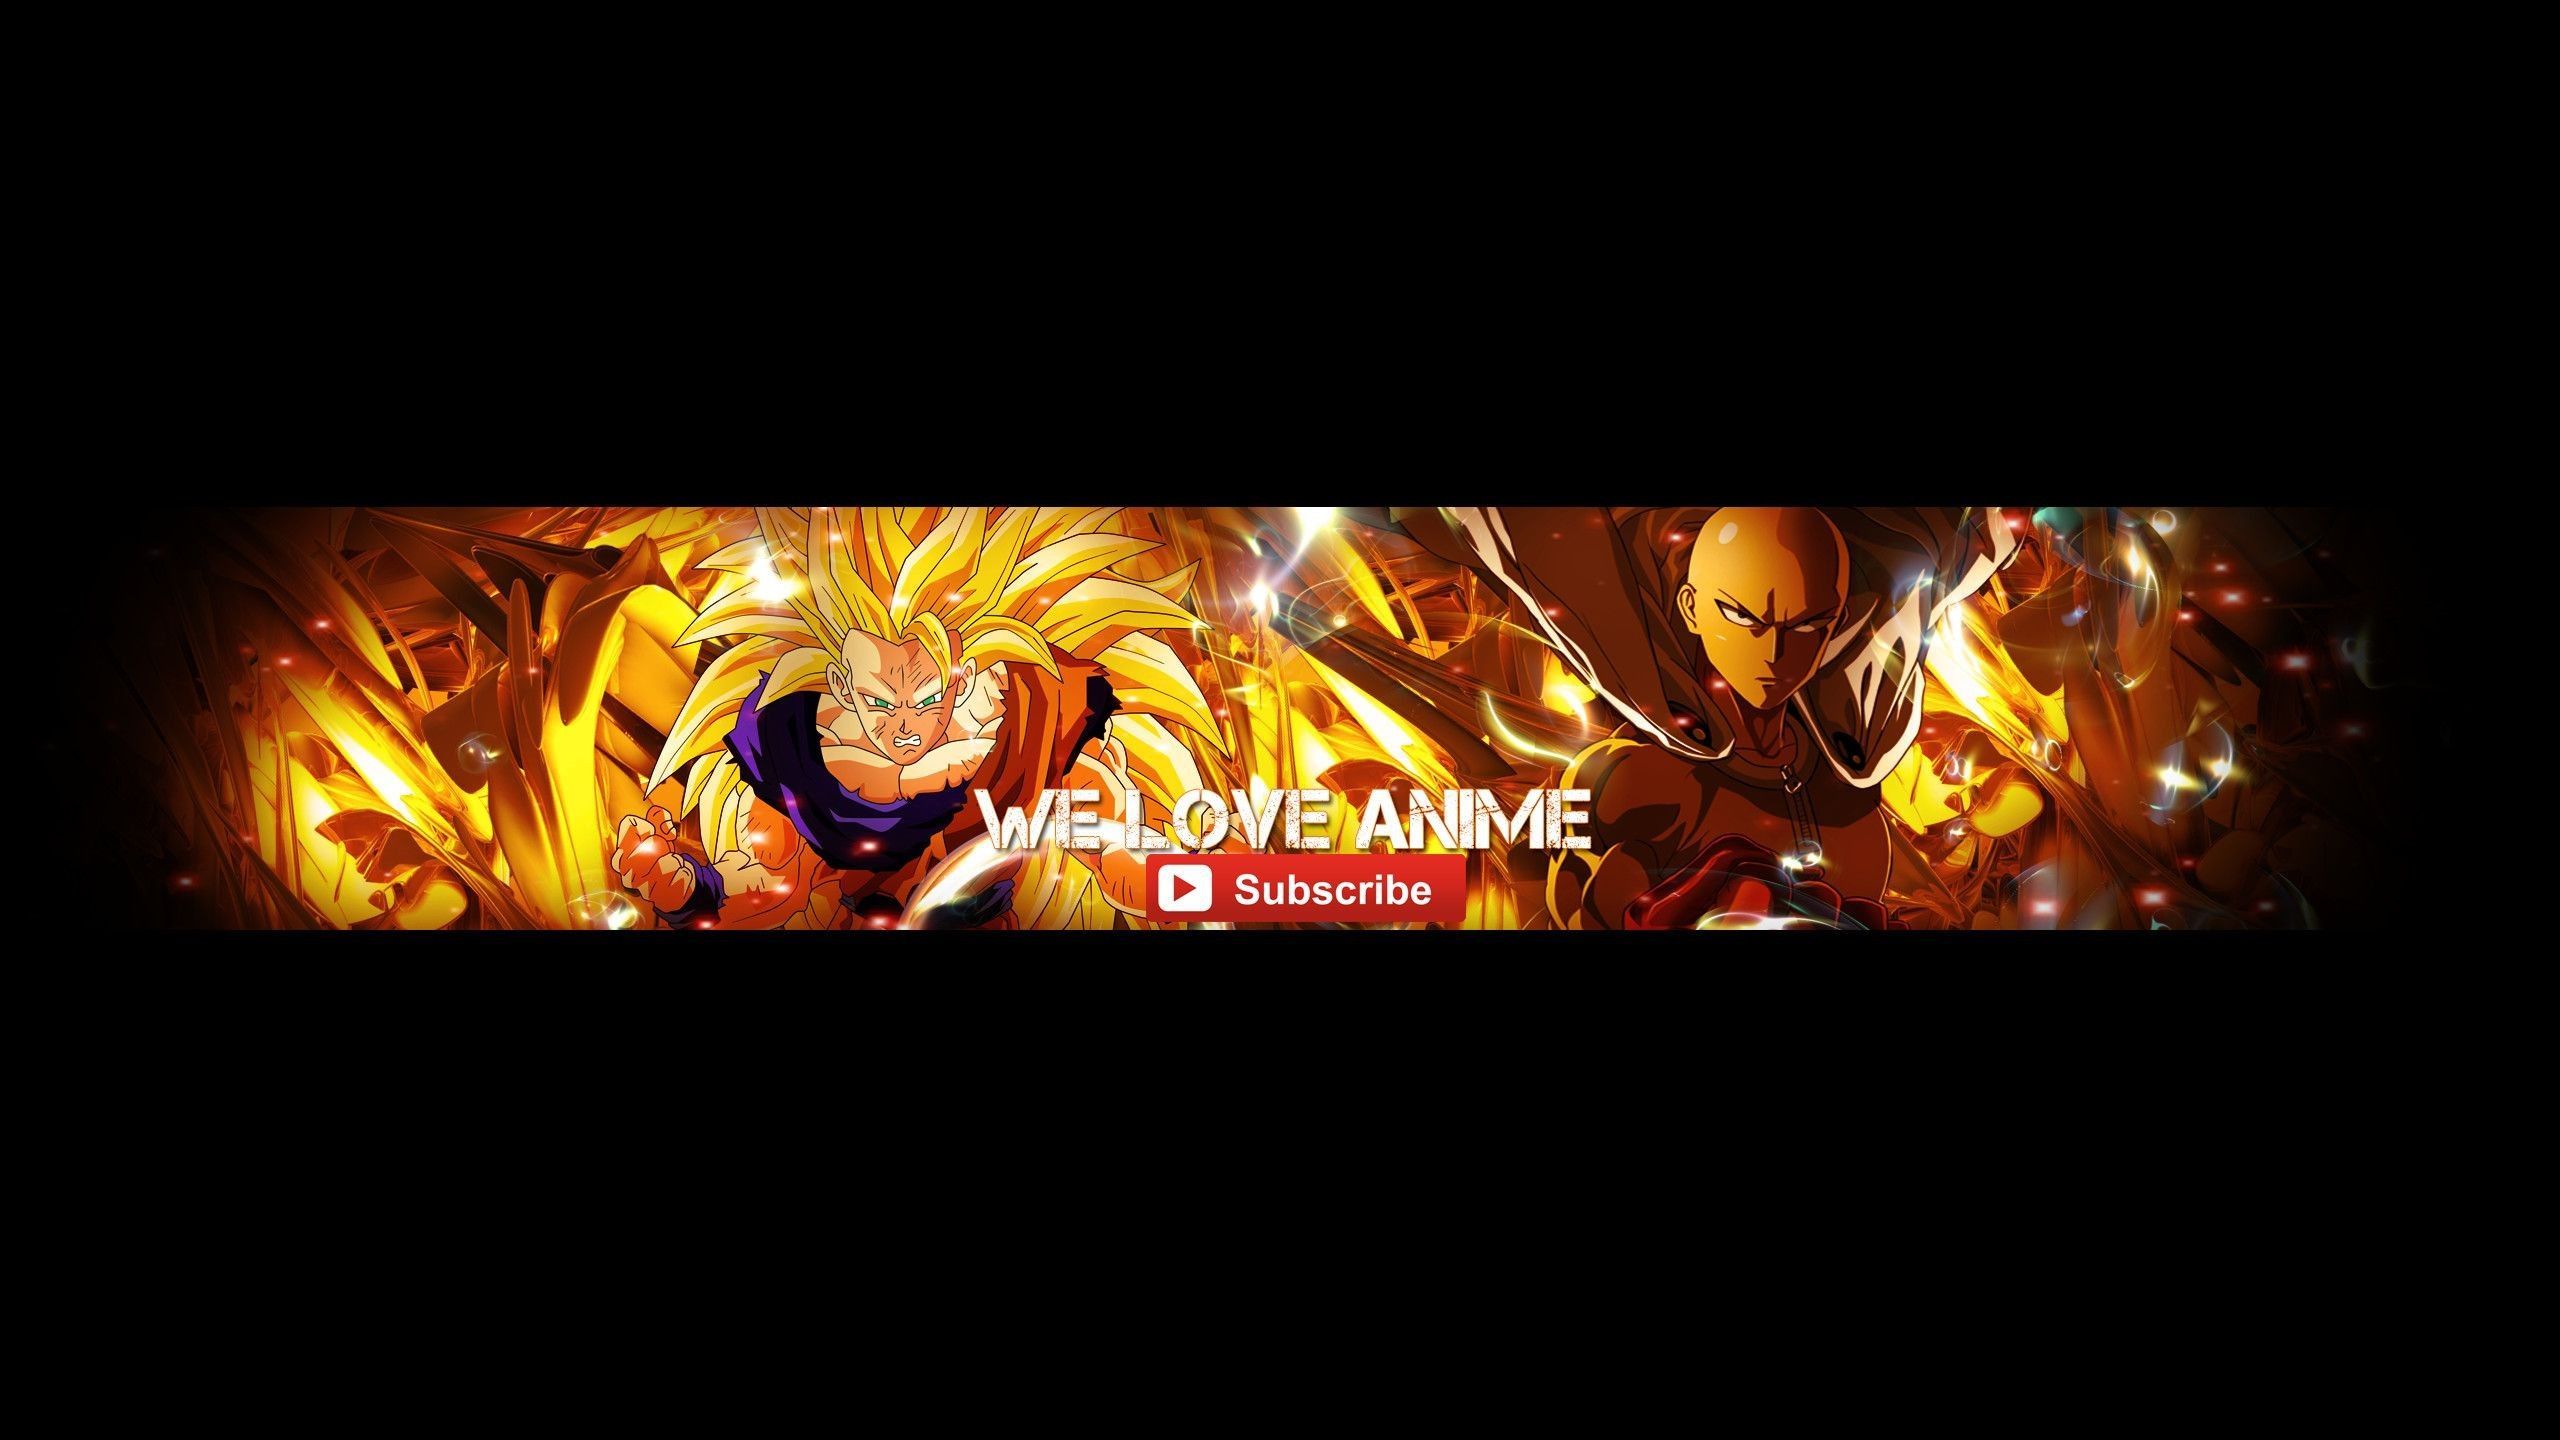 Youtube Banner Anime Is Youtube Banner Anime The Most Trending Thing Now?. Youtube channel art, Youtube banner , Youtube banners